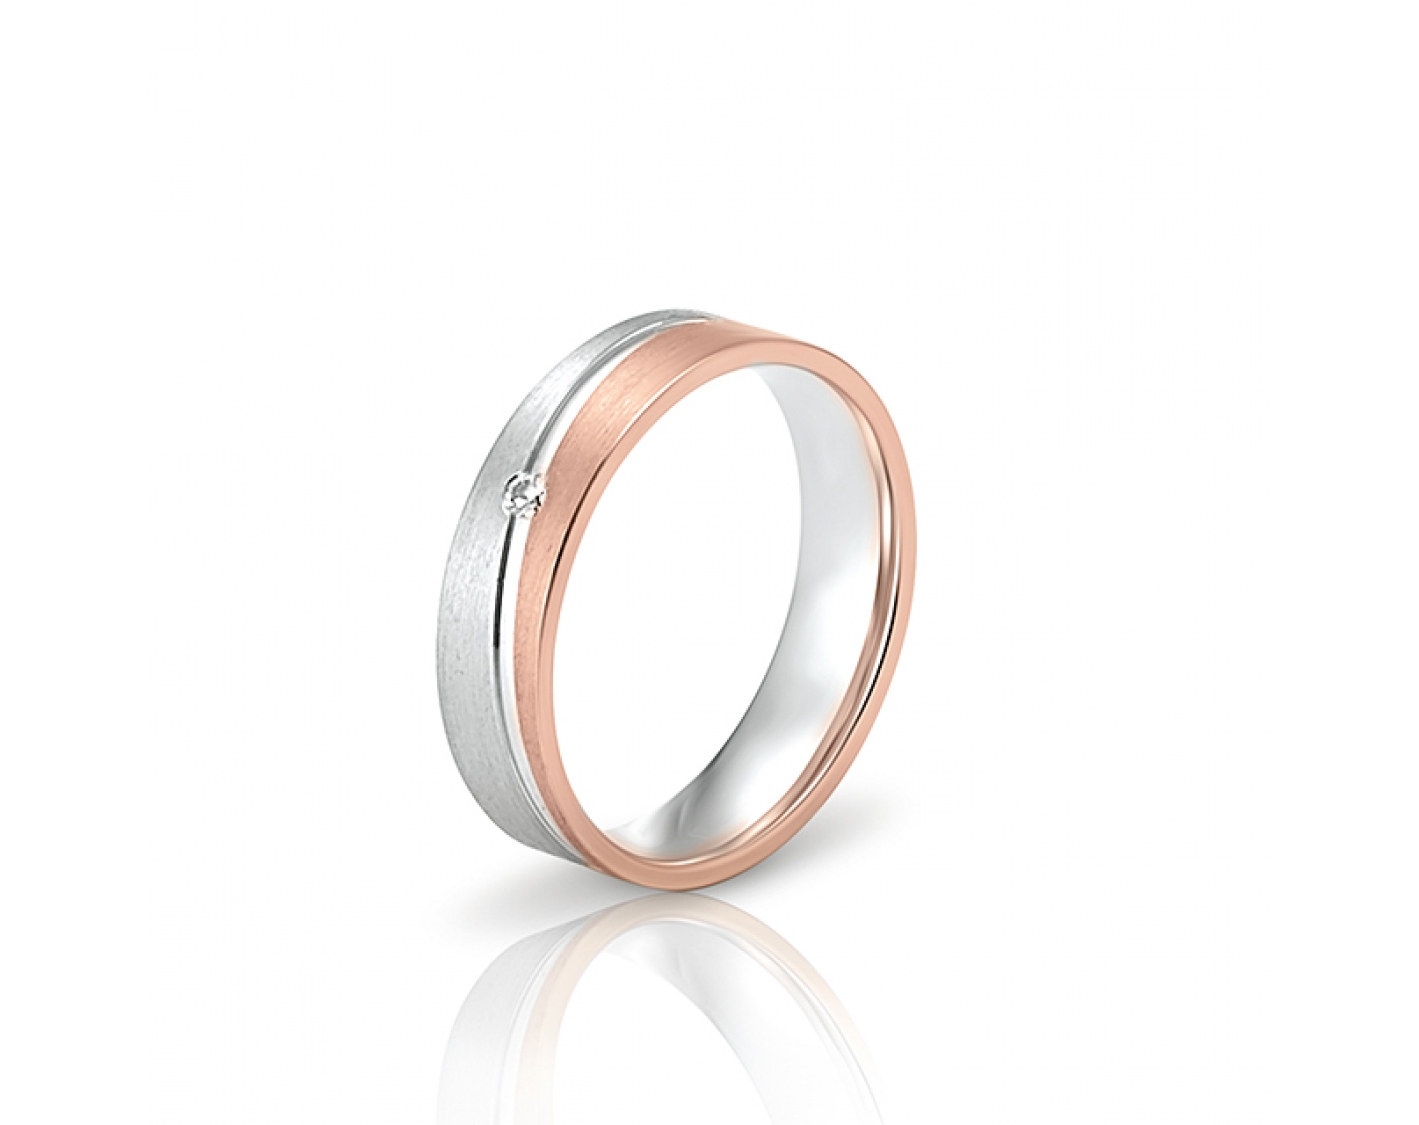 dual-tone 5mm two-toned* wedding band with one diamond and an inlay